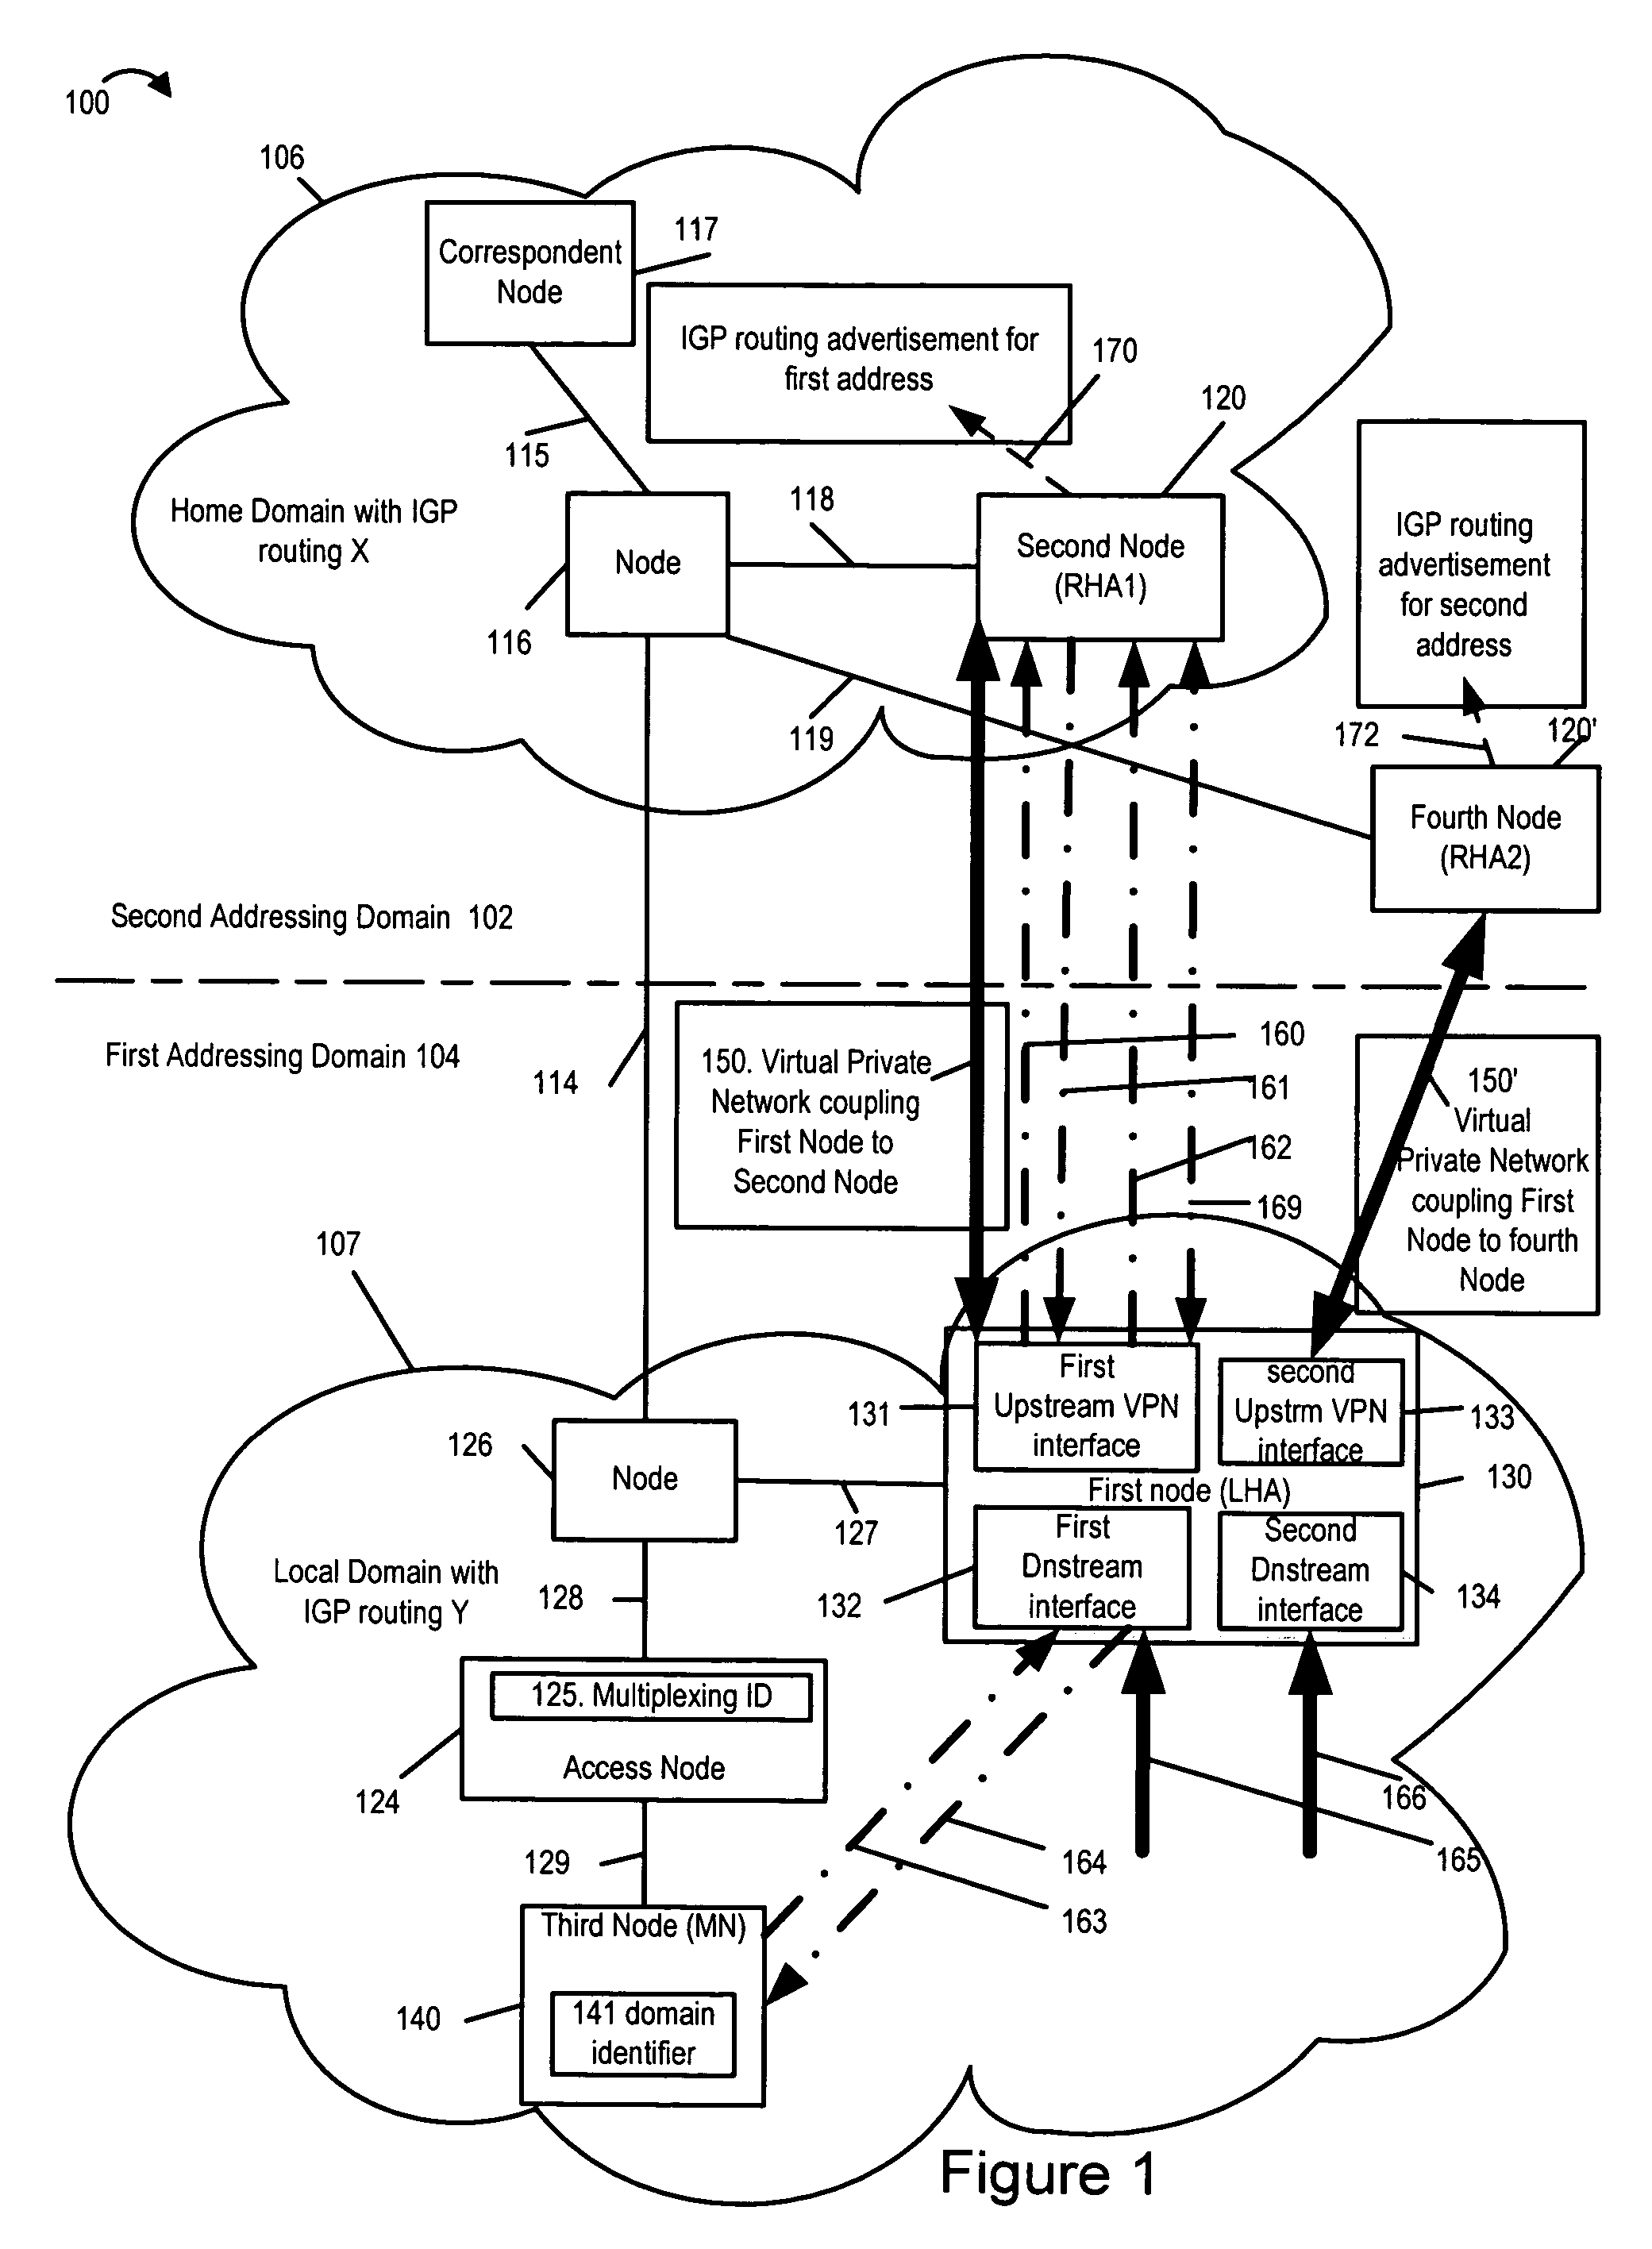 Methods and apparatus for efficient VPN server interface, address allocation, and signaling with a local addressing domain